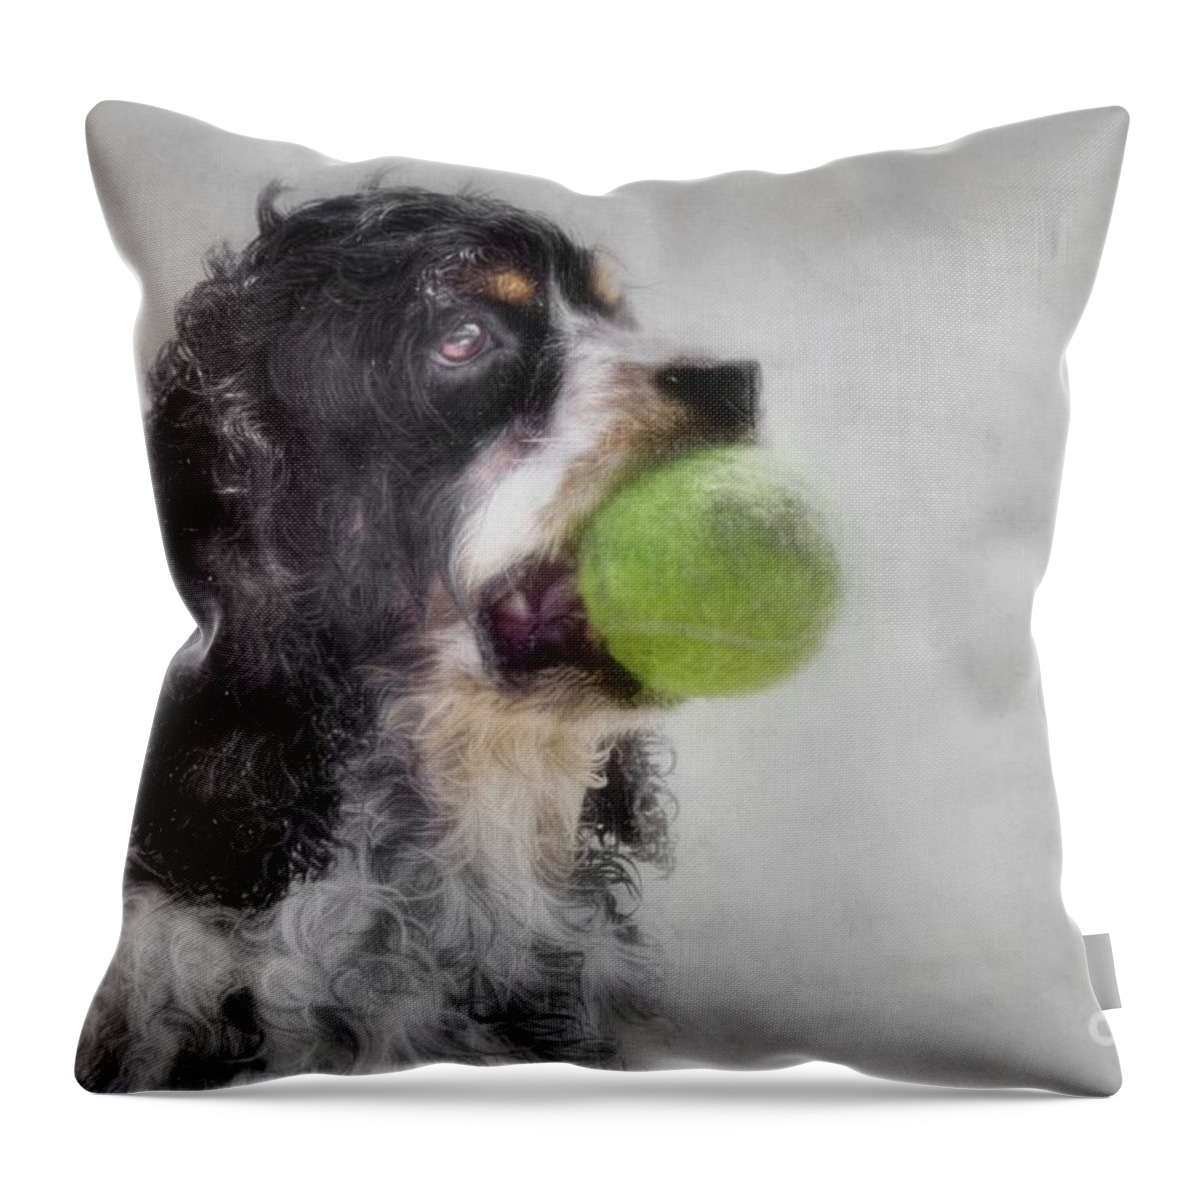 Cocker Spaniel Throw Pillow featuring the photograph Fetching Cocker Spaniel by Benanne Stiens